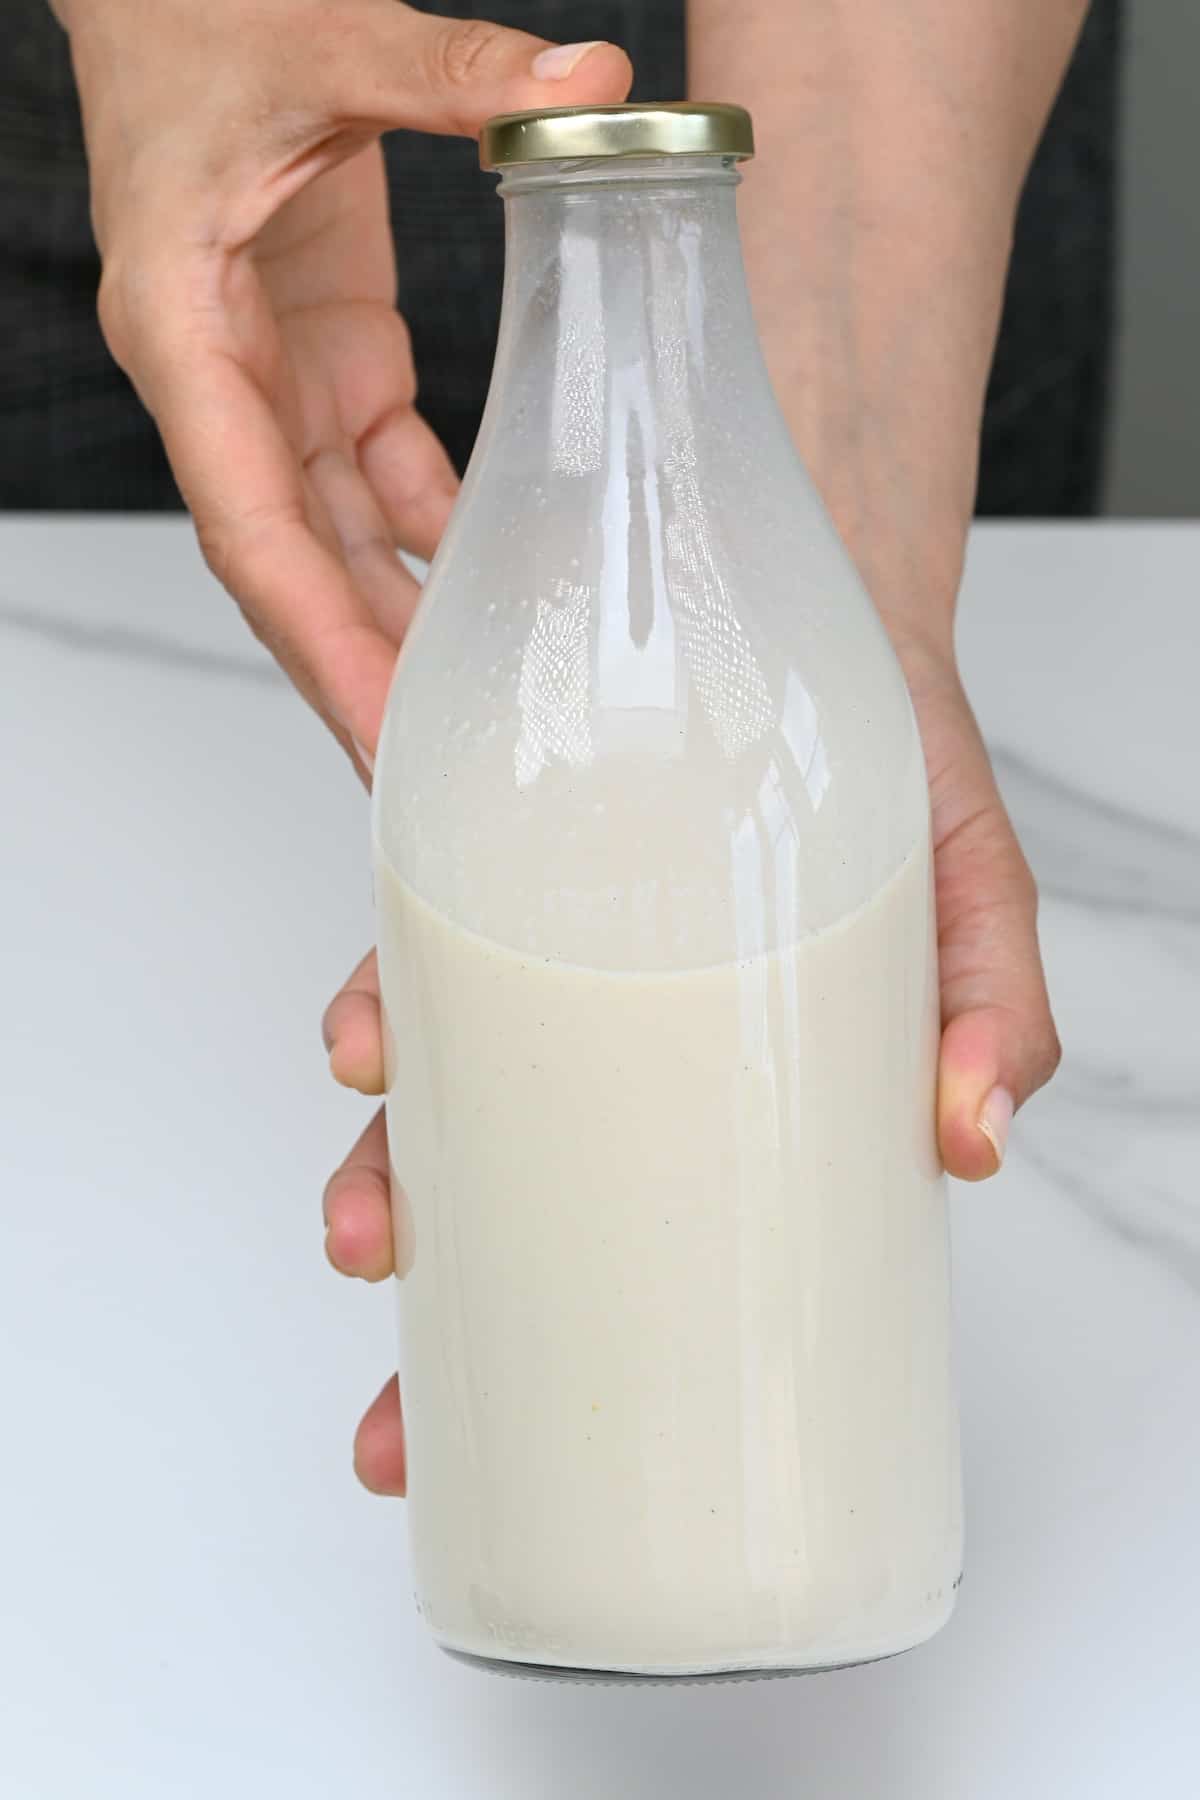 A bottle with Mexican horchata